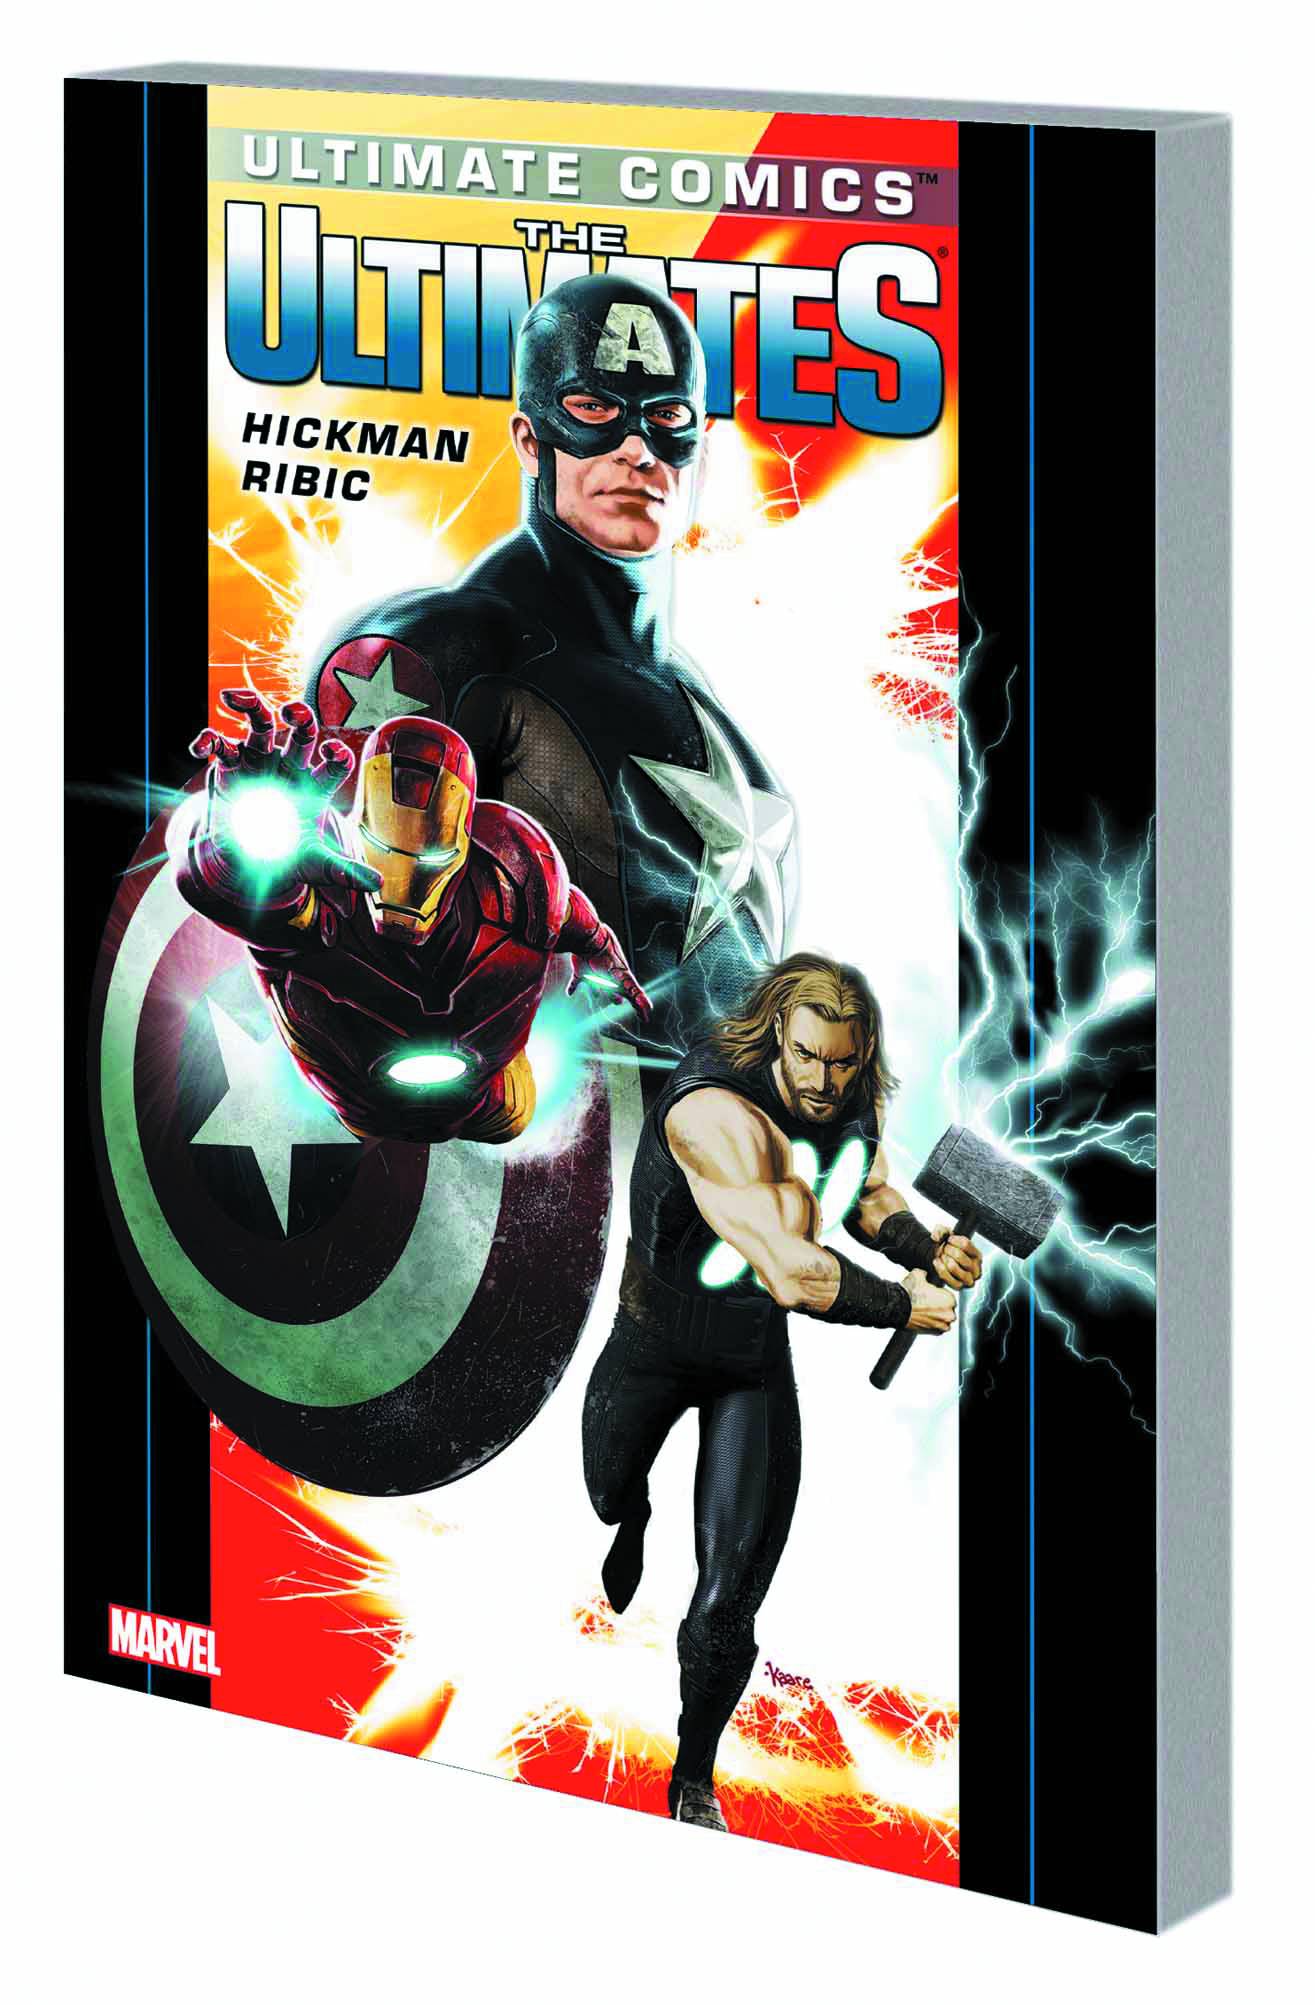 Ultimate Comics Ultimates by Hickman Graphic Novel Volume 1